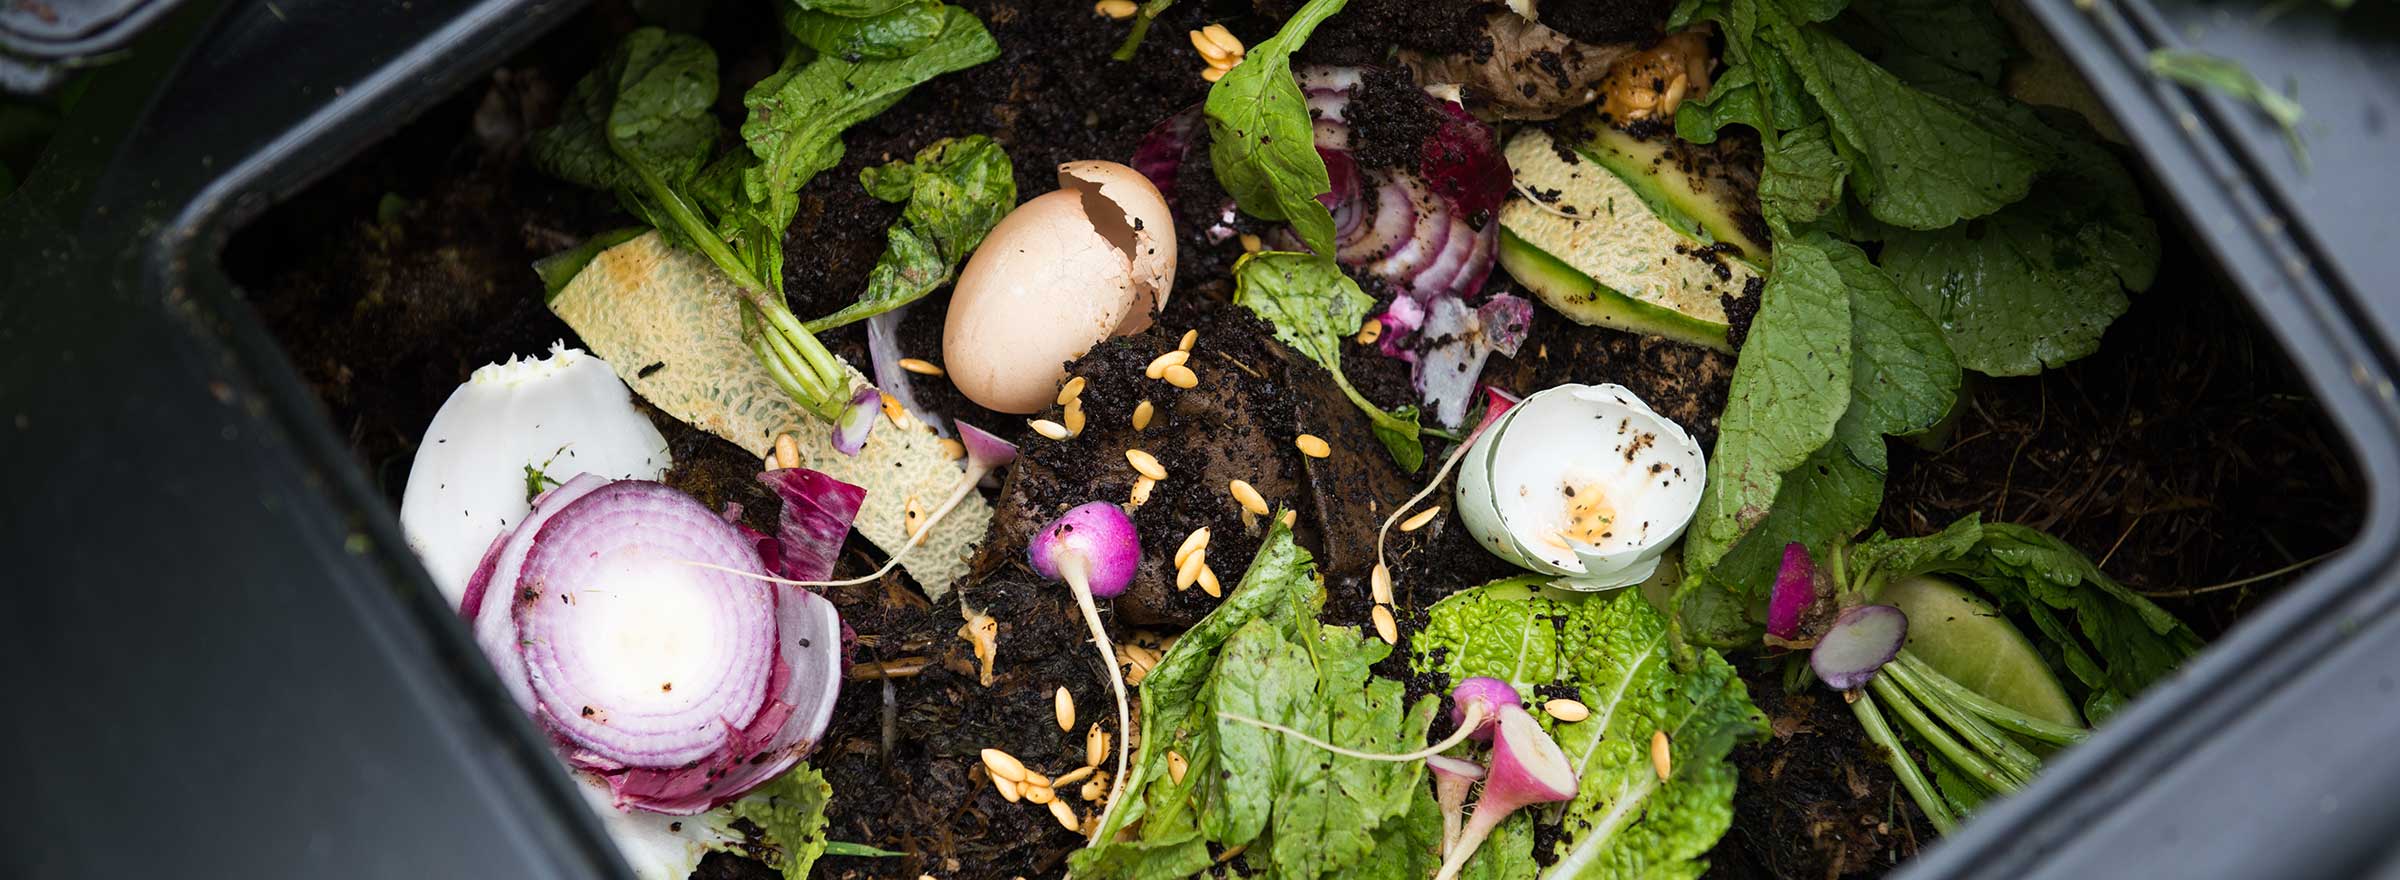 Composting for Restaurants: How and Why